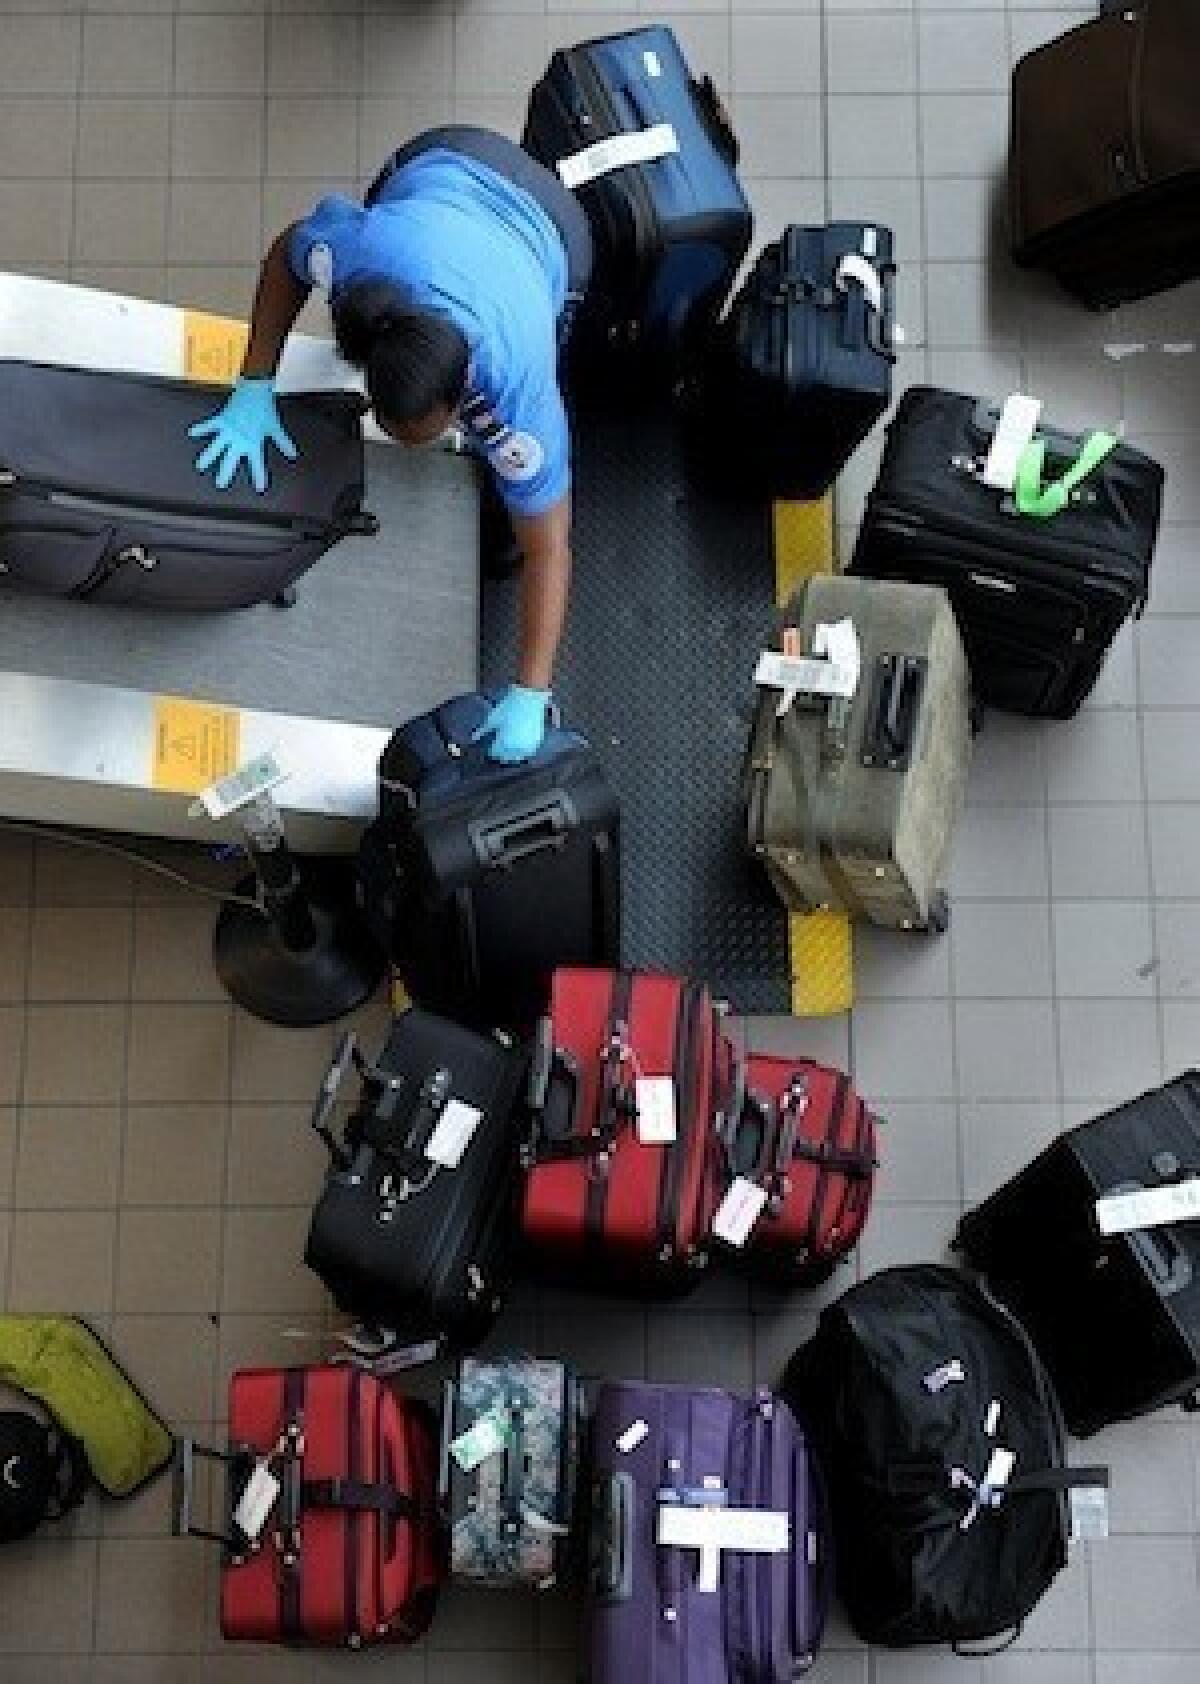 A TSA agent loads luggage onto a belt to be X-rayed at Los Angeles International Airport. Travelers are required to pack liquids more than 3.4 ounces in their checked luggage.